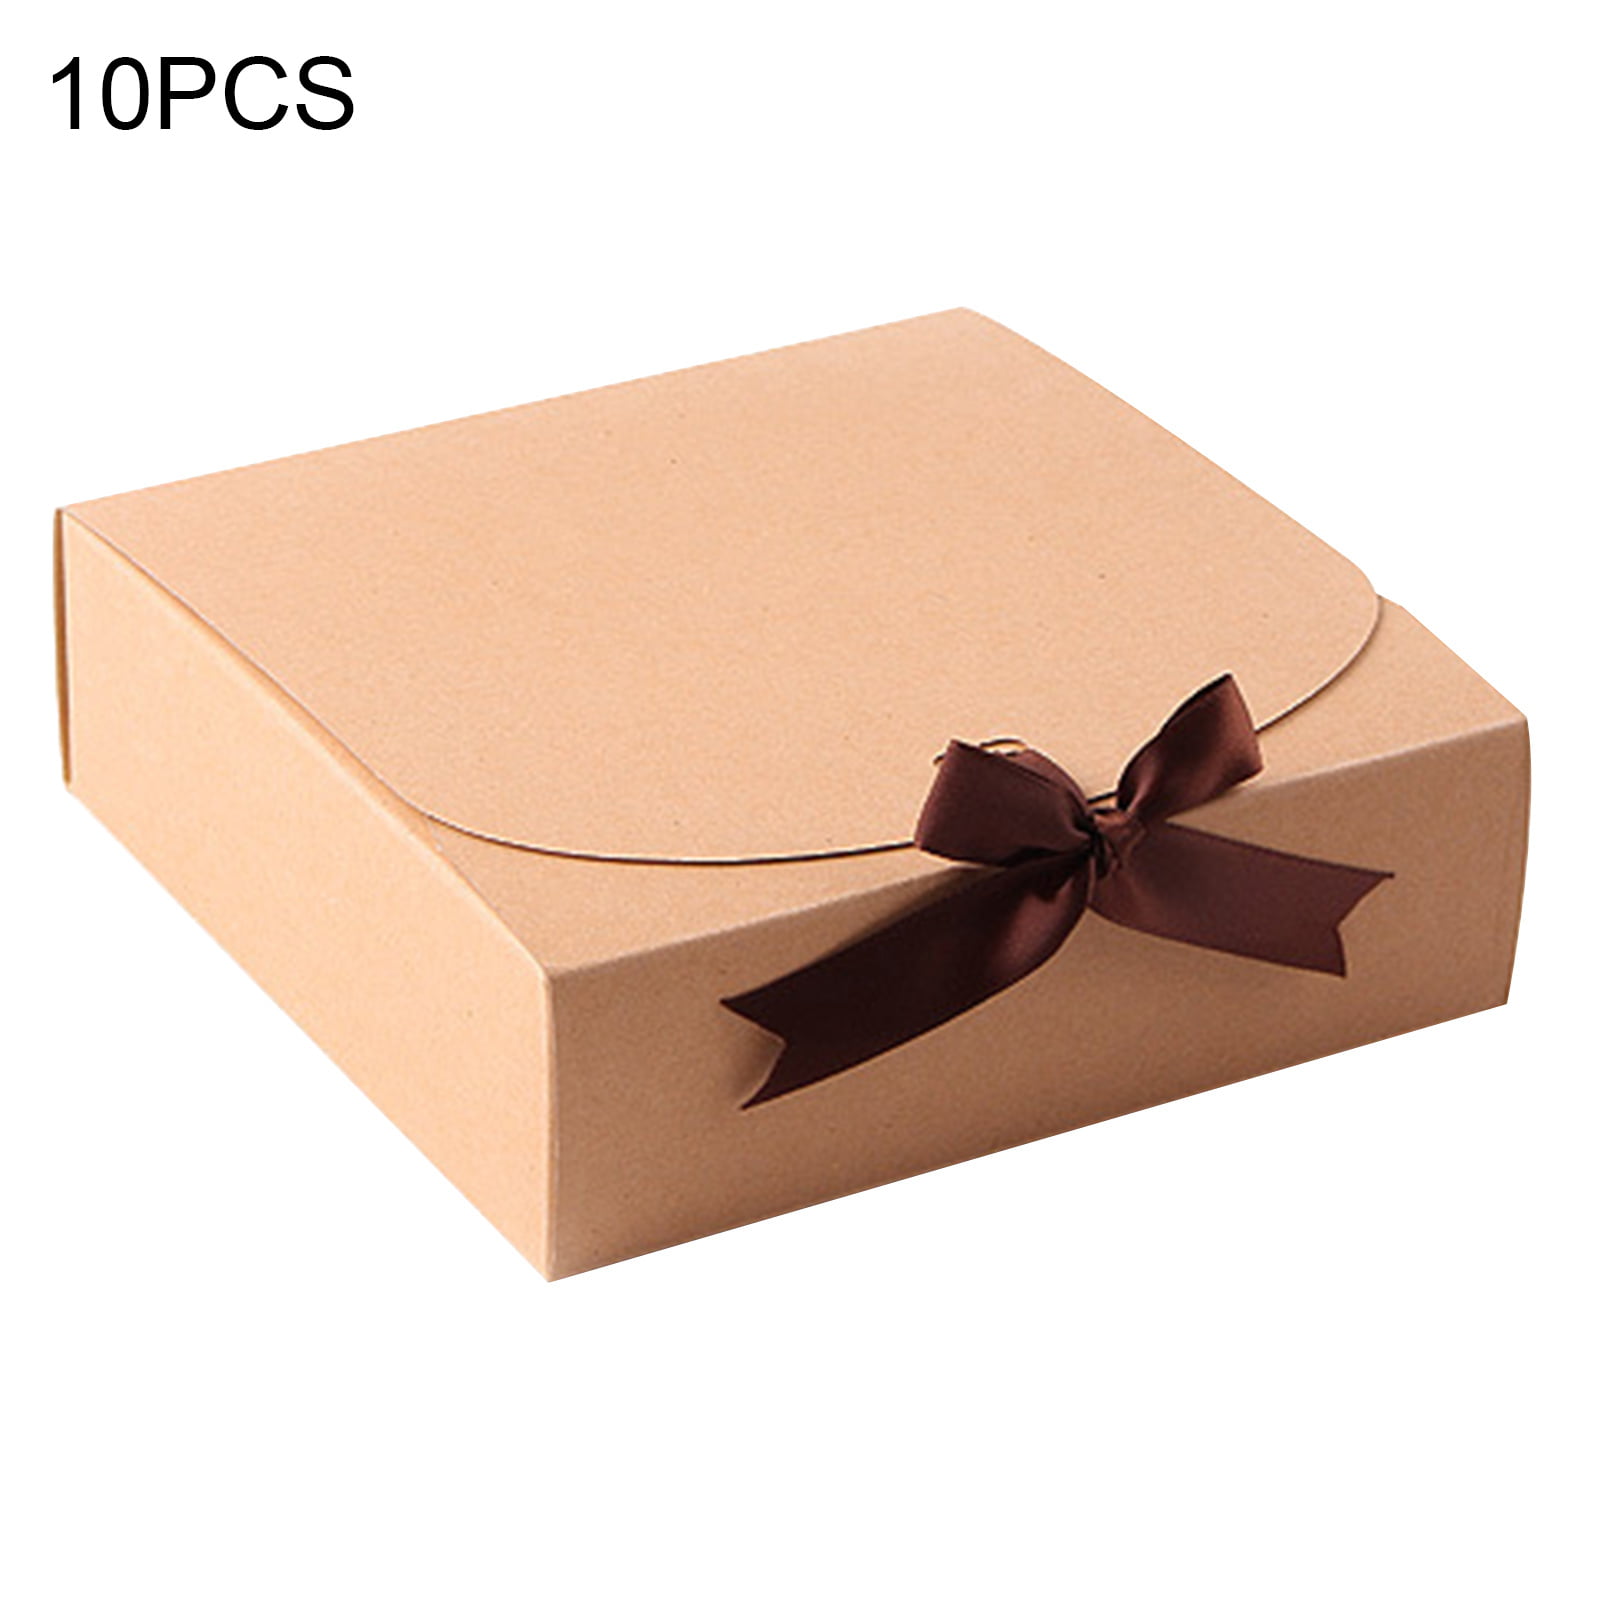 Details about   10pcs Christmas Birthday Gift Cardboard Box Jewelry Packing Case Container 